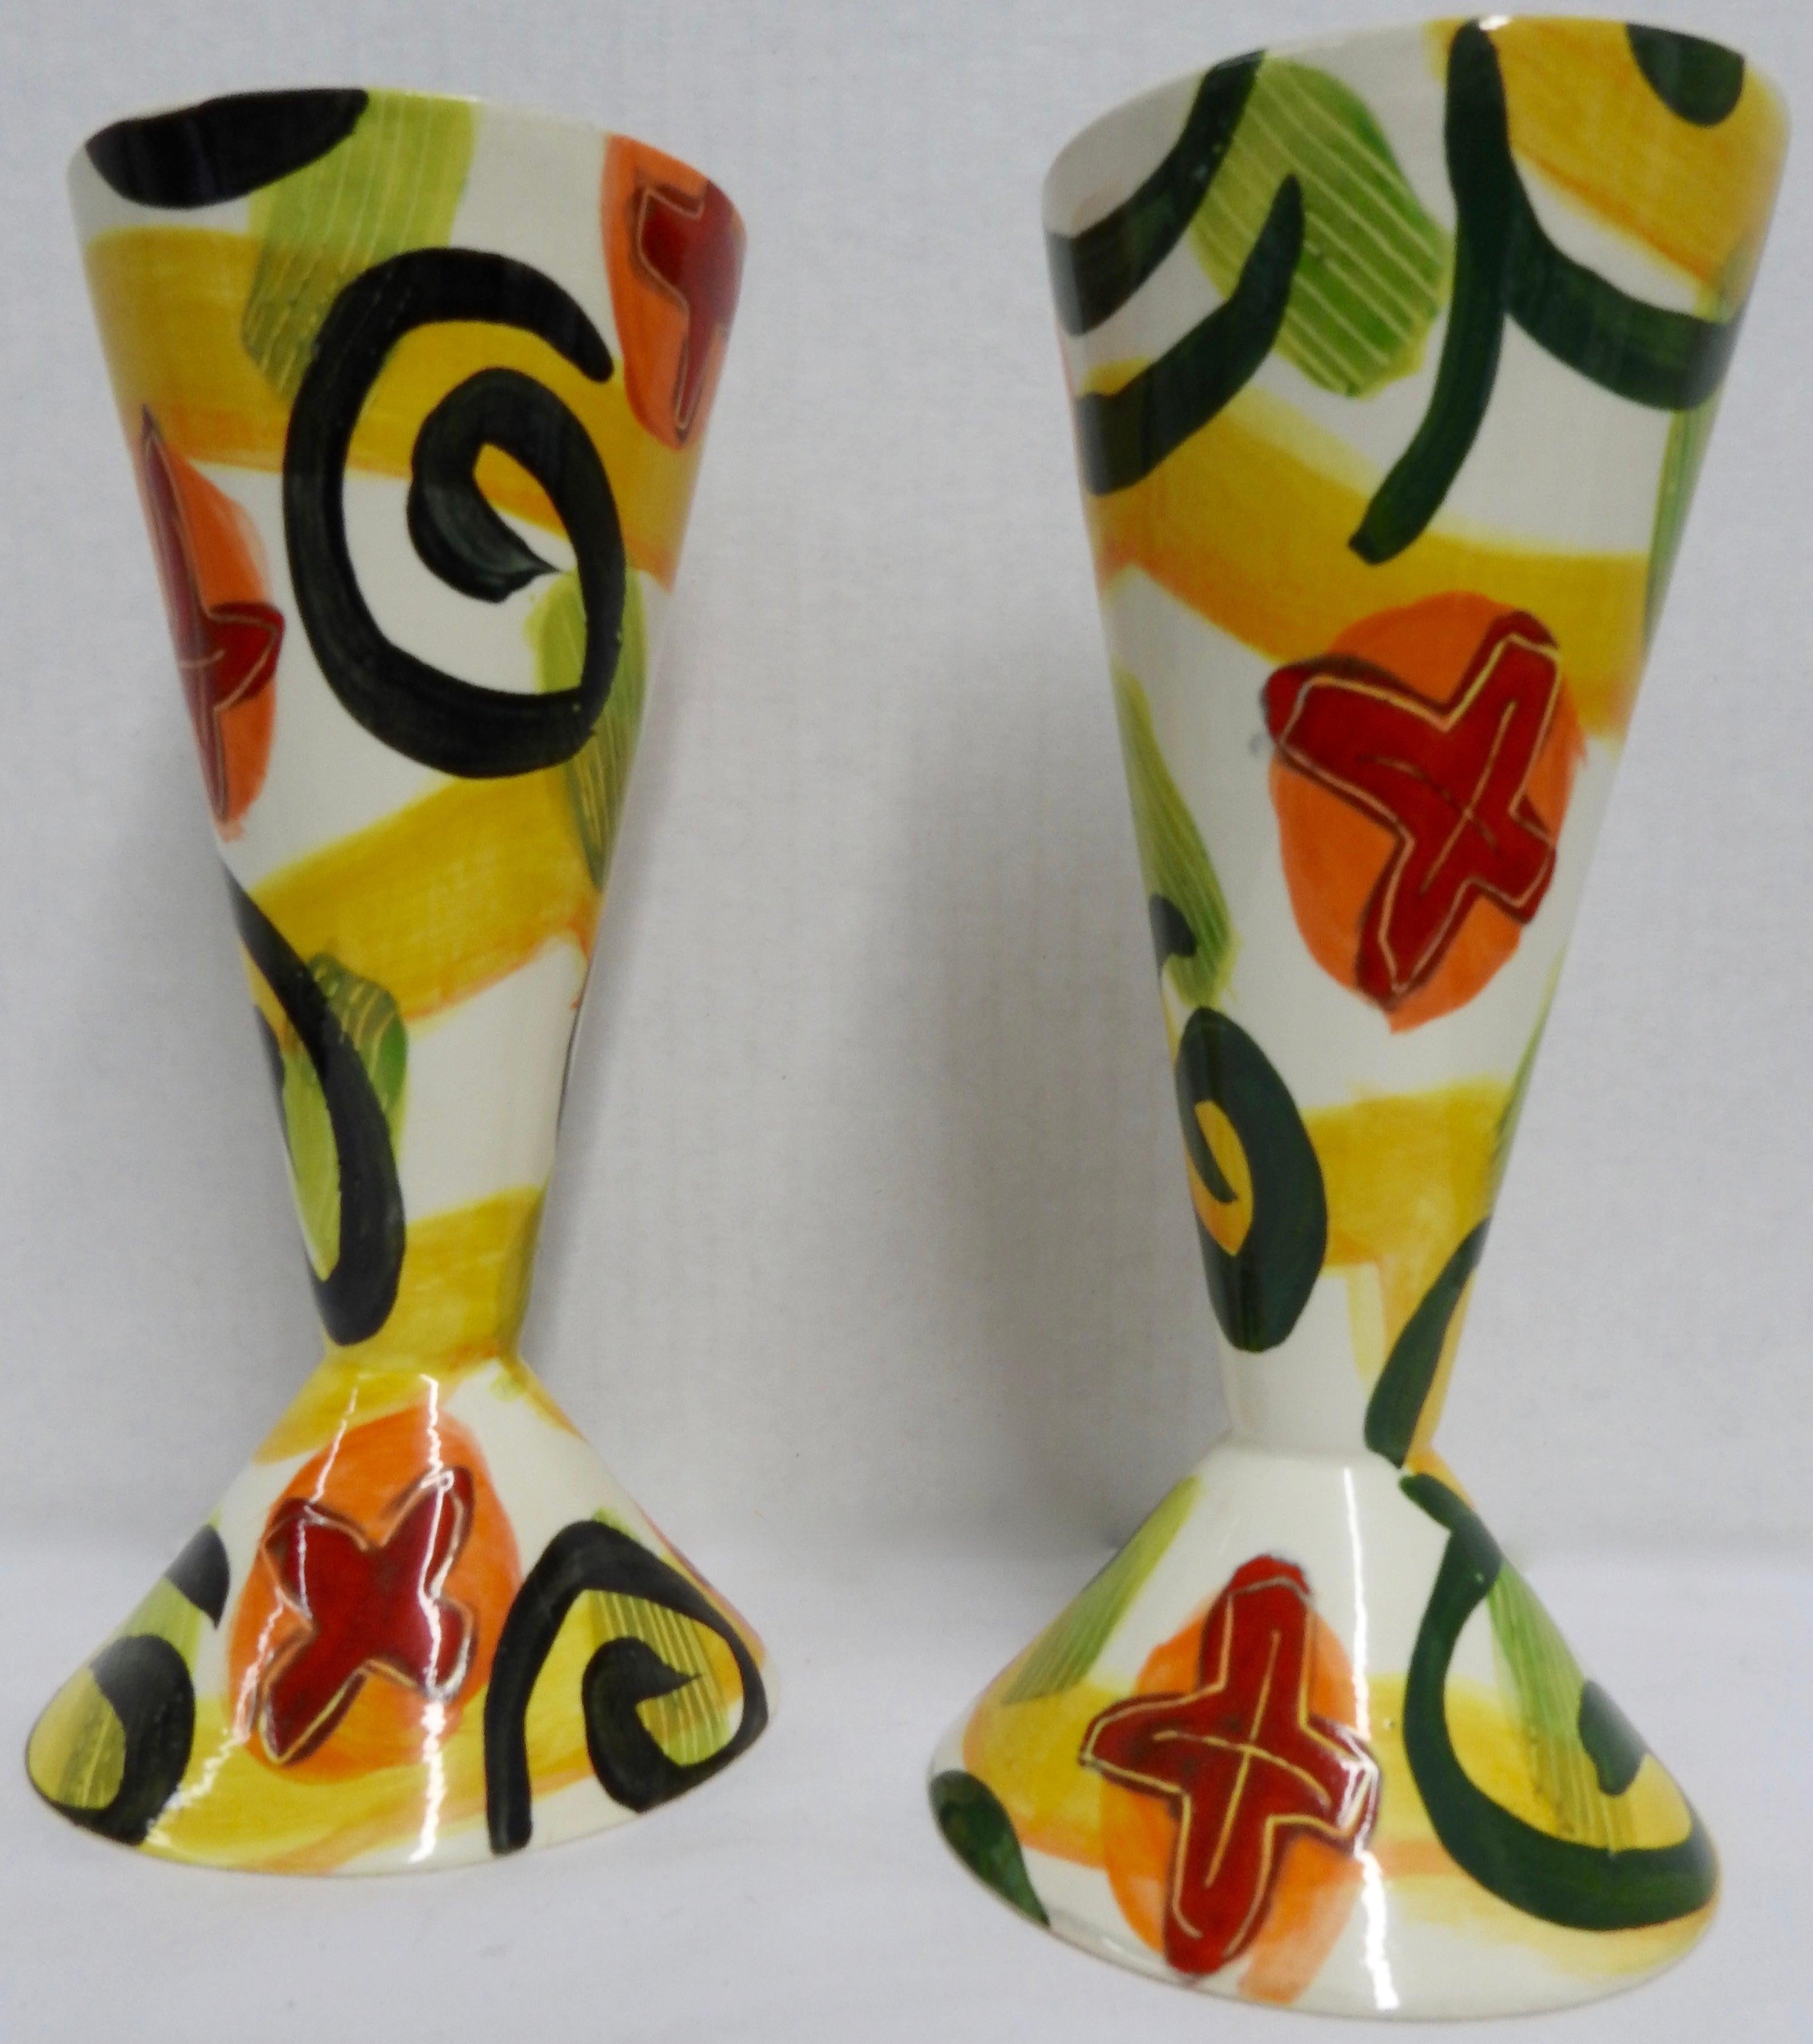 Bold shades of red, orange, yellow and green on white compliment this pair of whimsical goblets by ceramic artist Marilee Hall. The inside is glazed in shiny black. Both goblets are signed on the bottom.